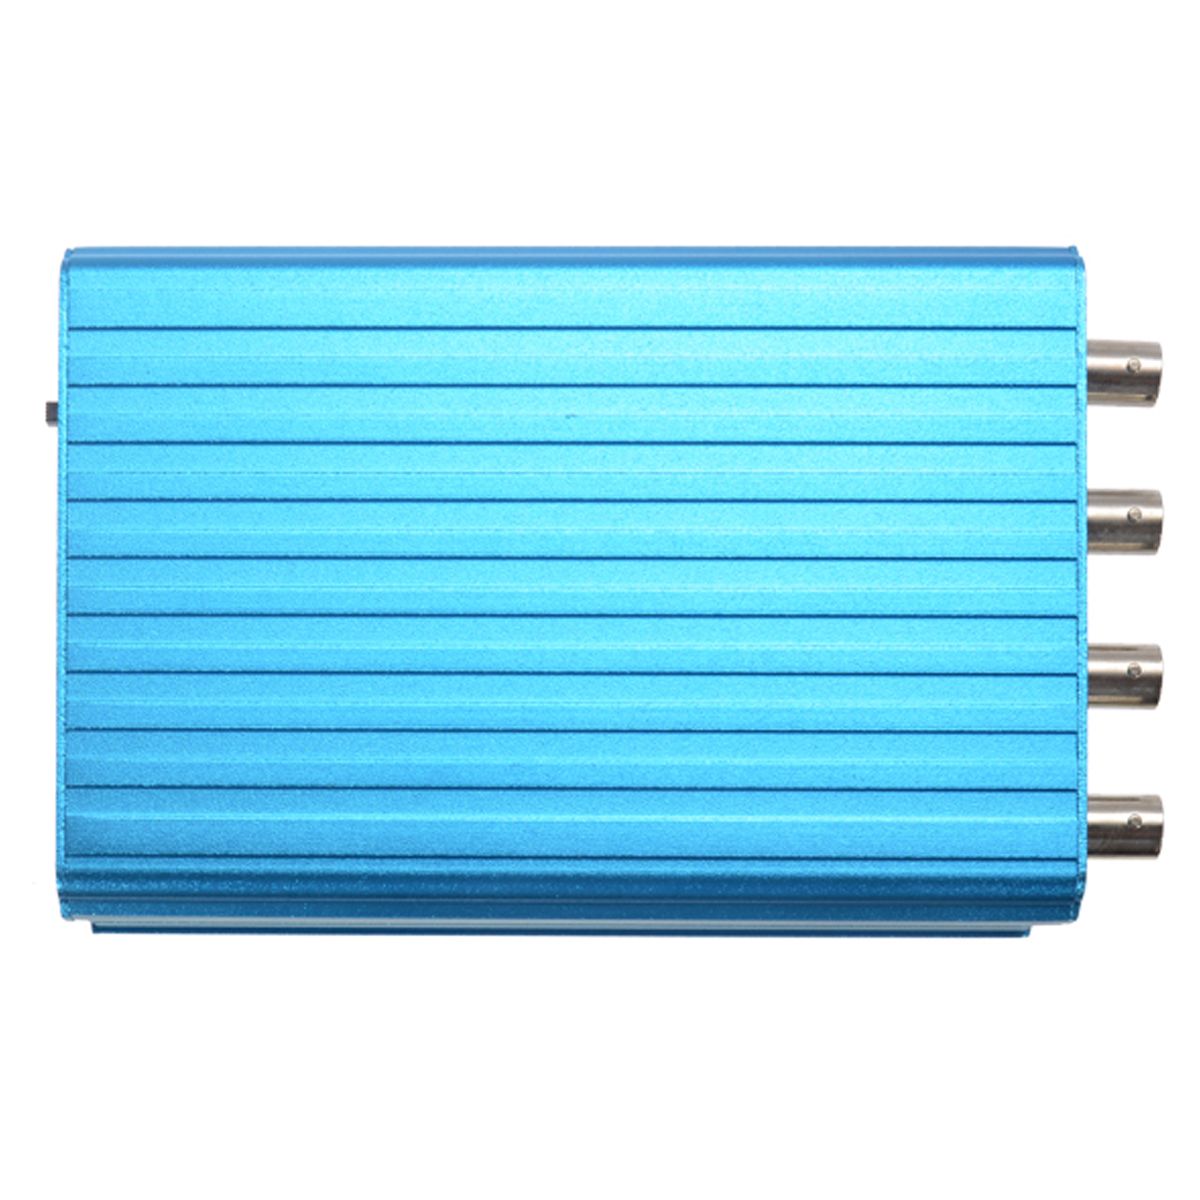 FY2300-20MHz-Arbitrary-Waveform-Dual-Channel-High-Frequency-Signal-Generator-200MSas-100MHz-Frequenc-1218088